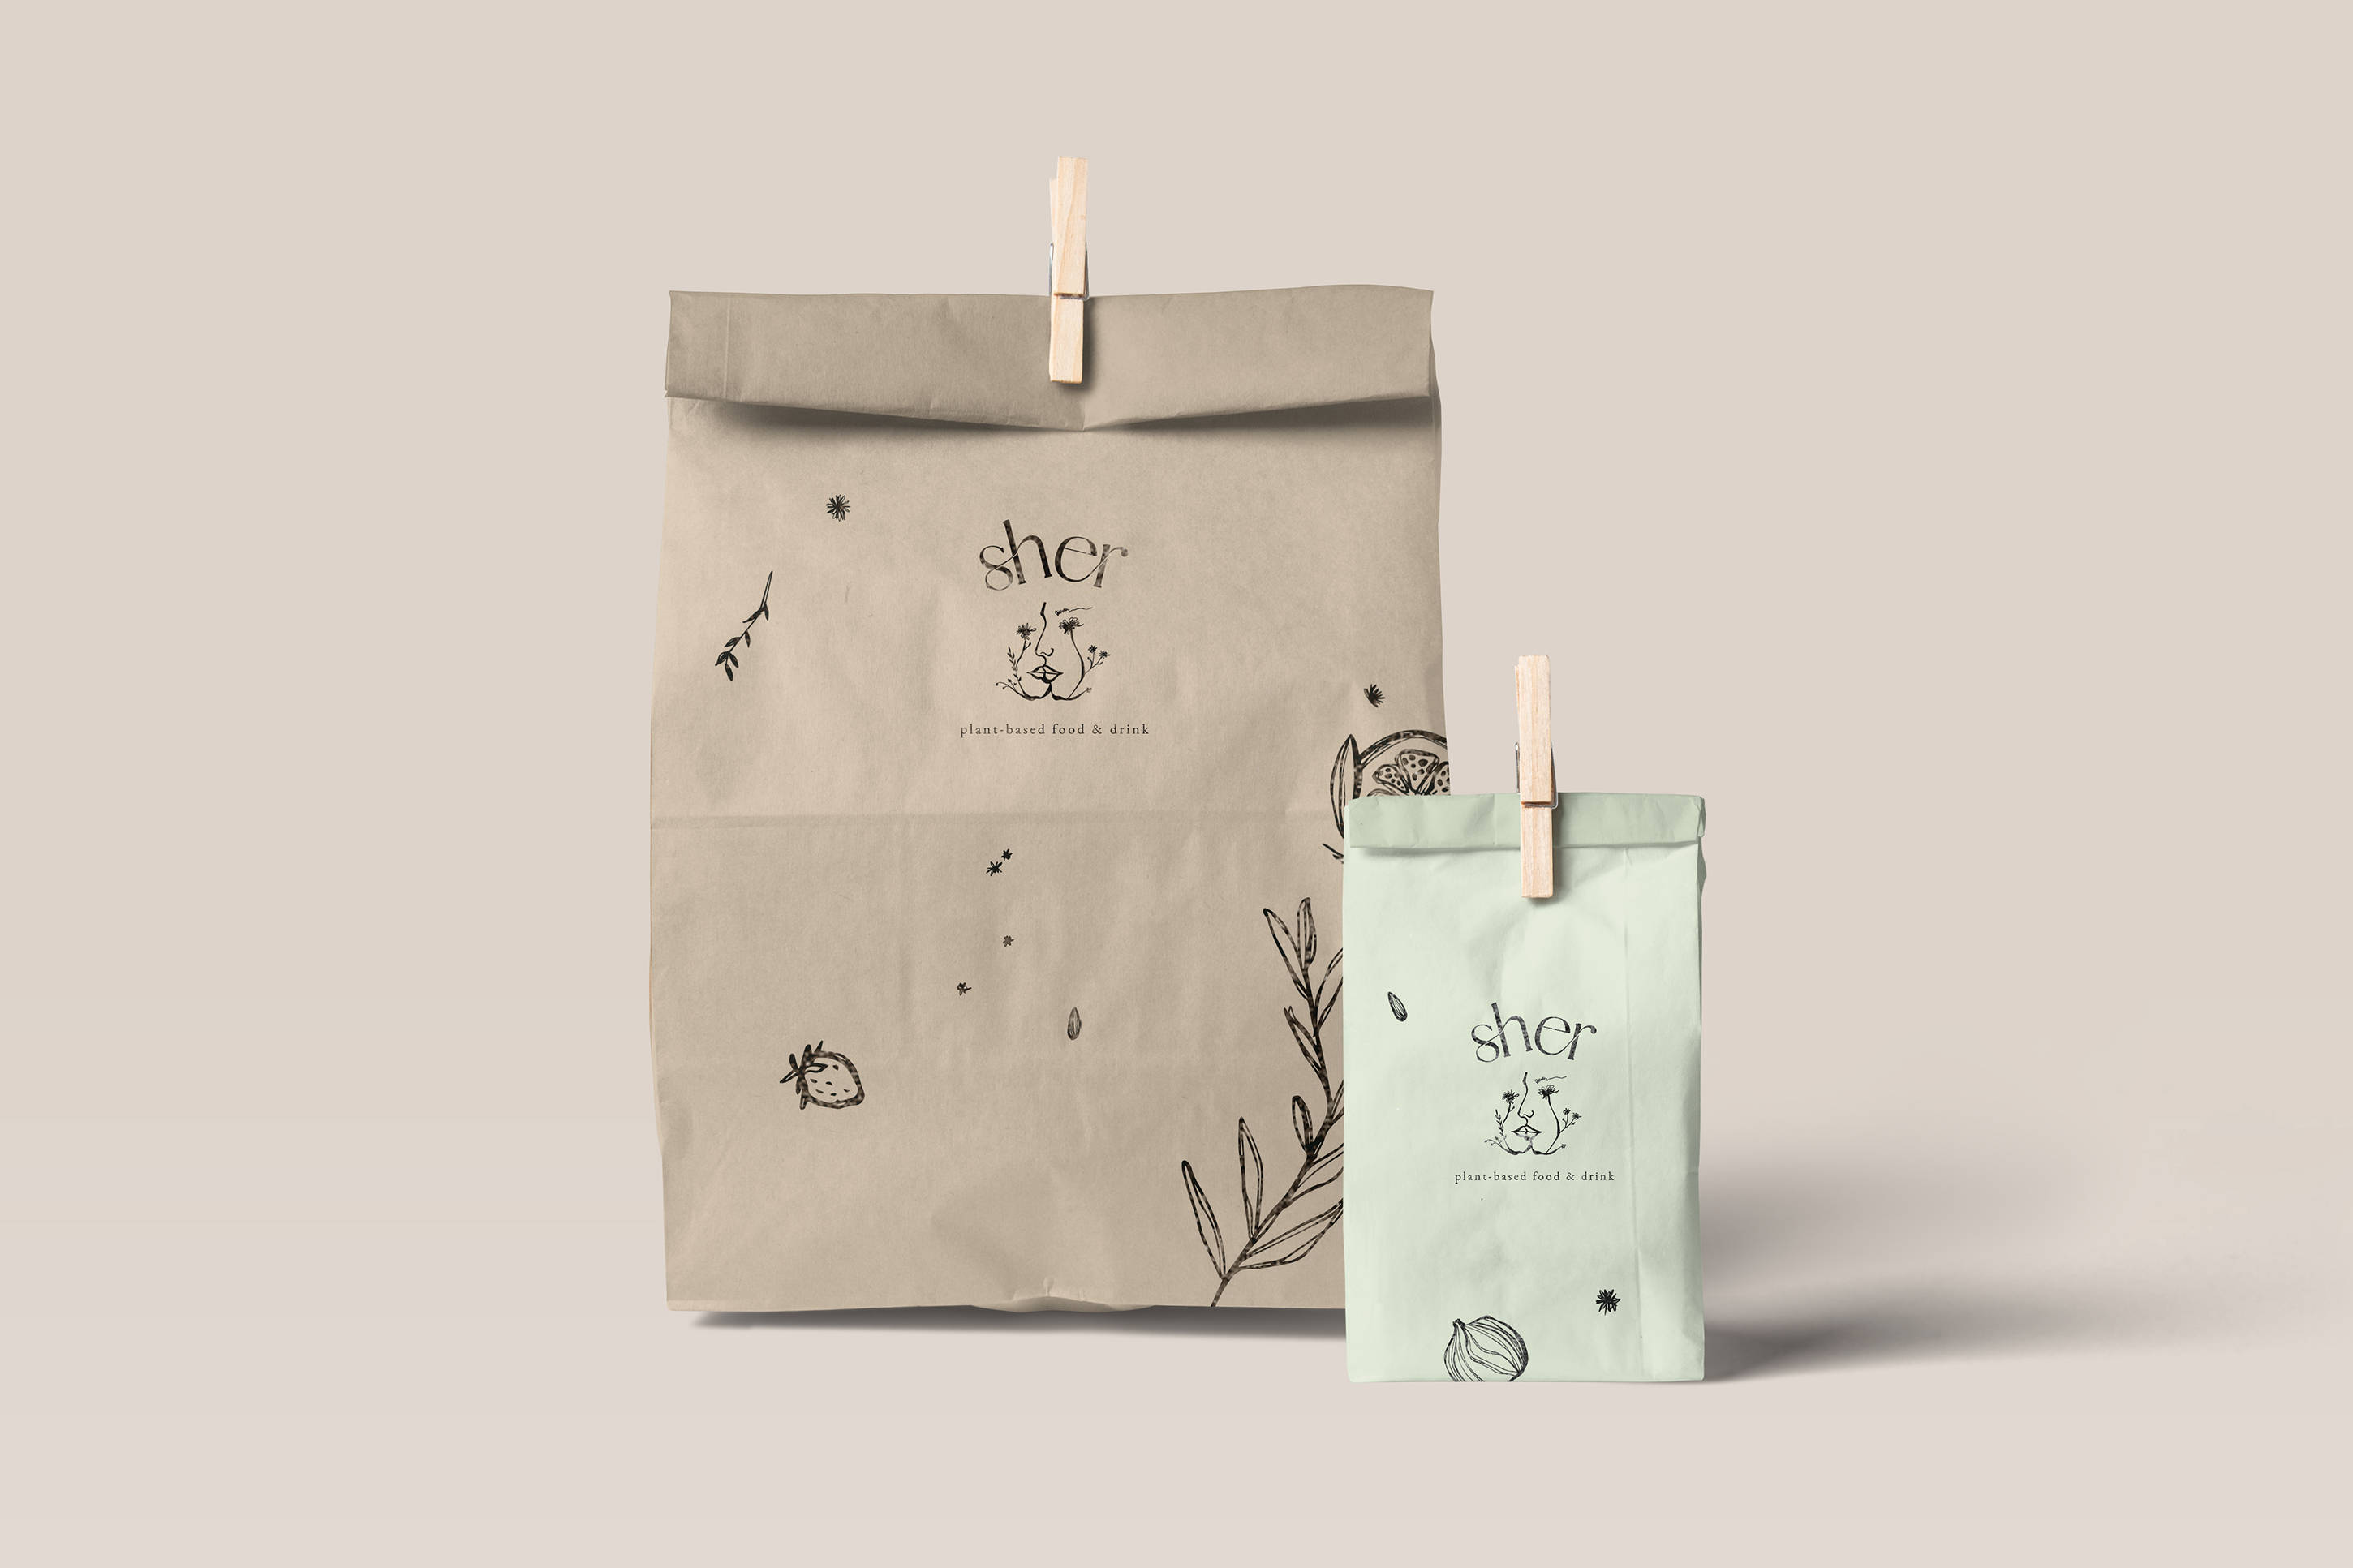 Two takeaway paper bags with the Sher logo and several different illustrations stamped on them